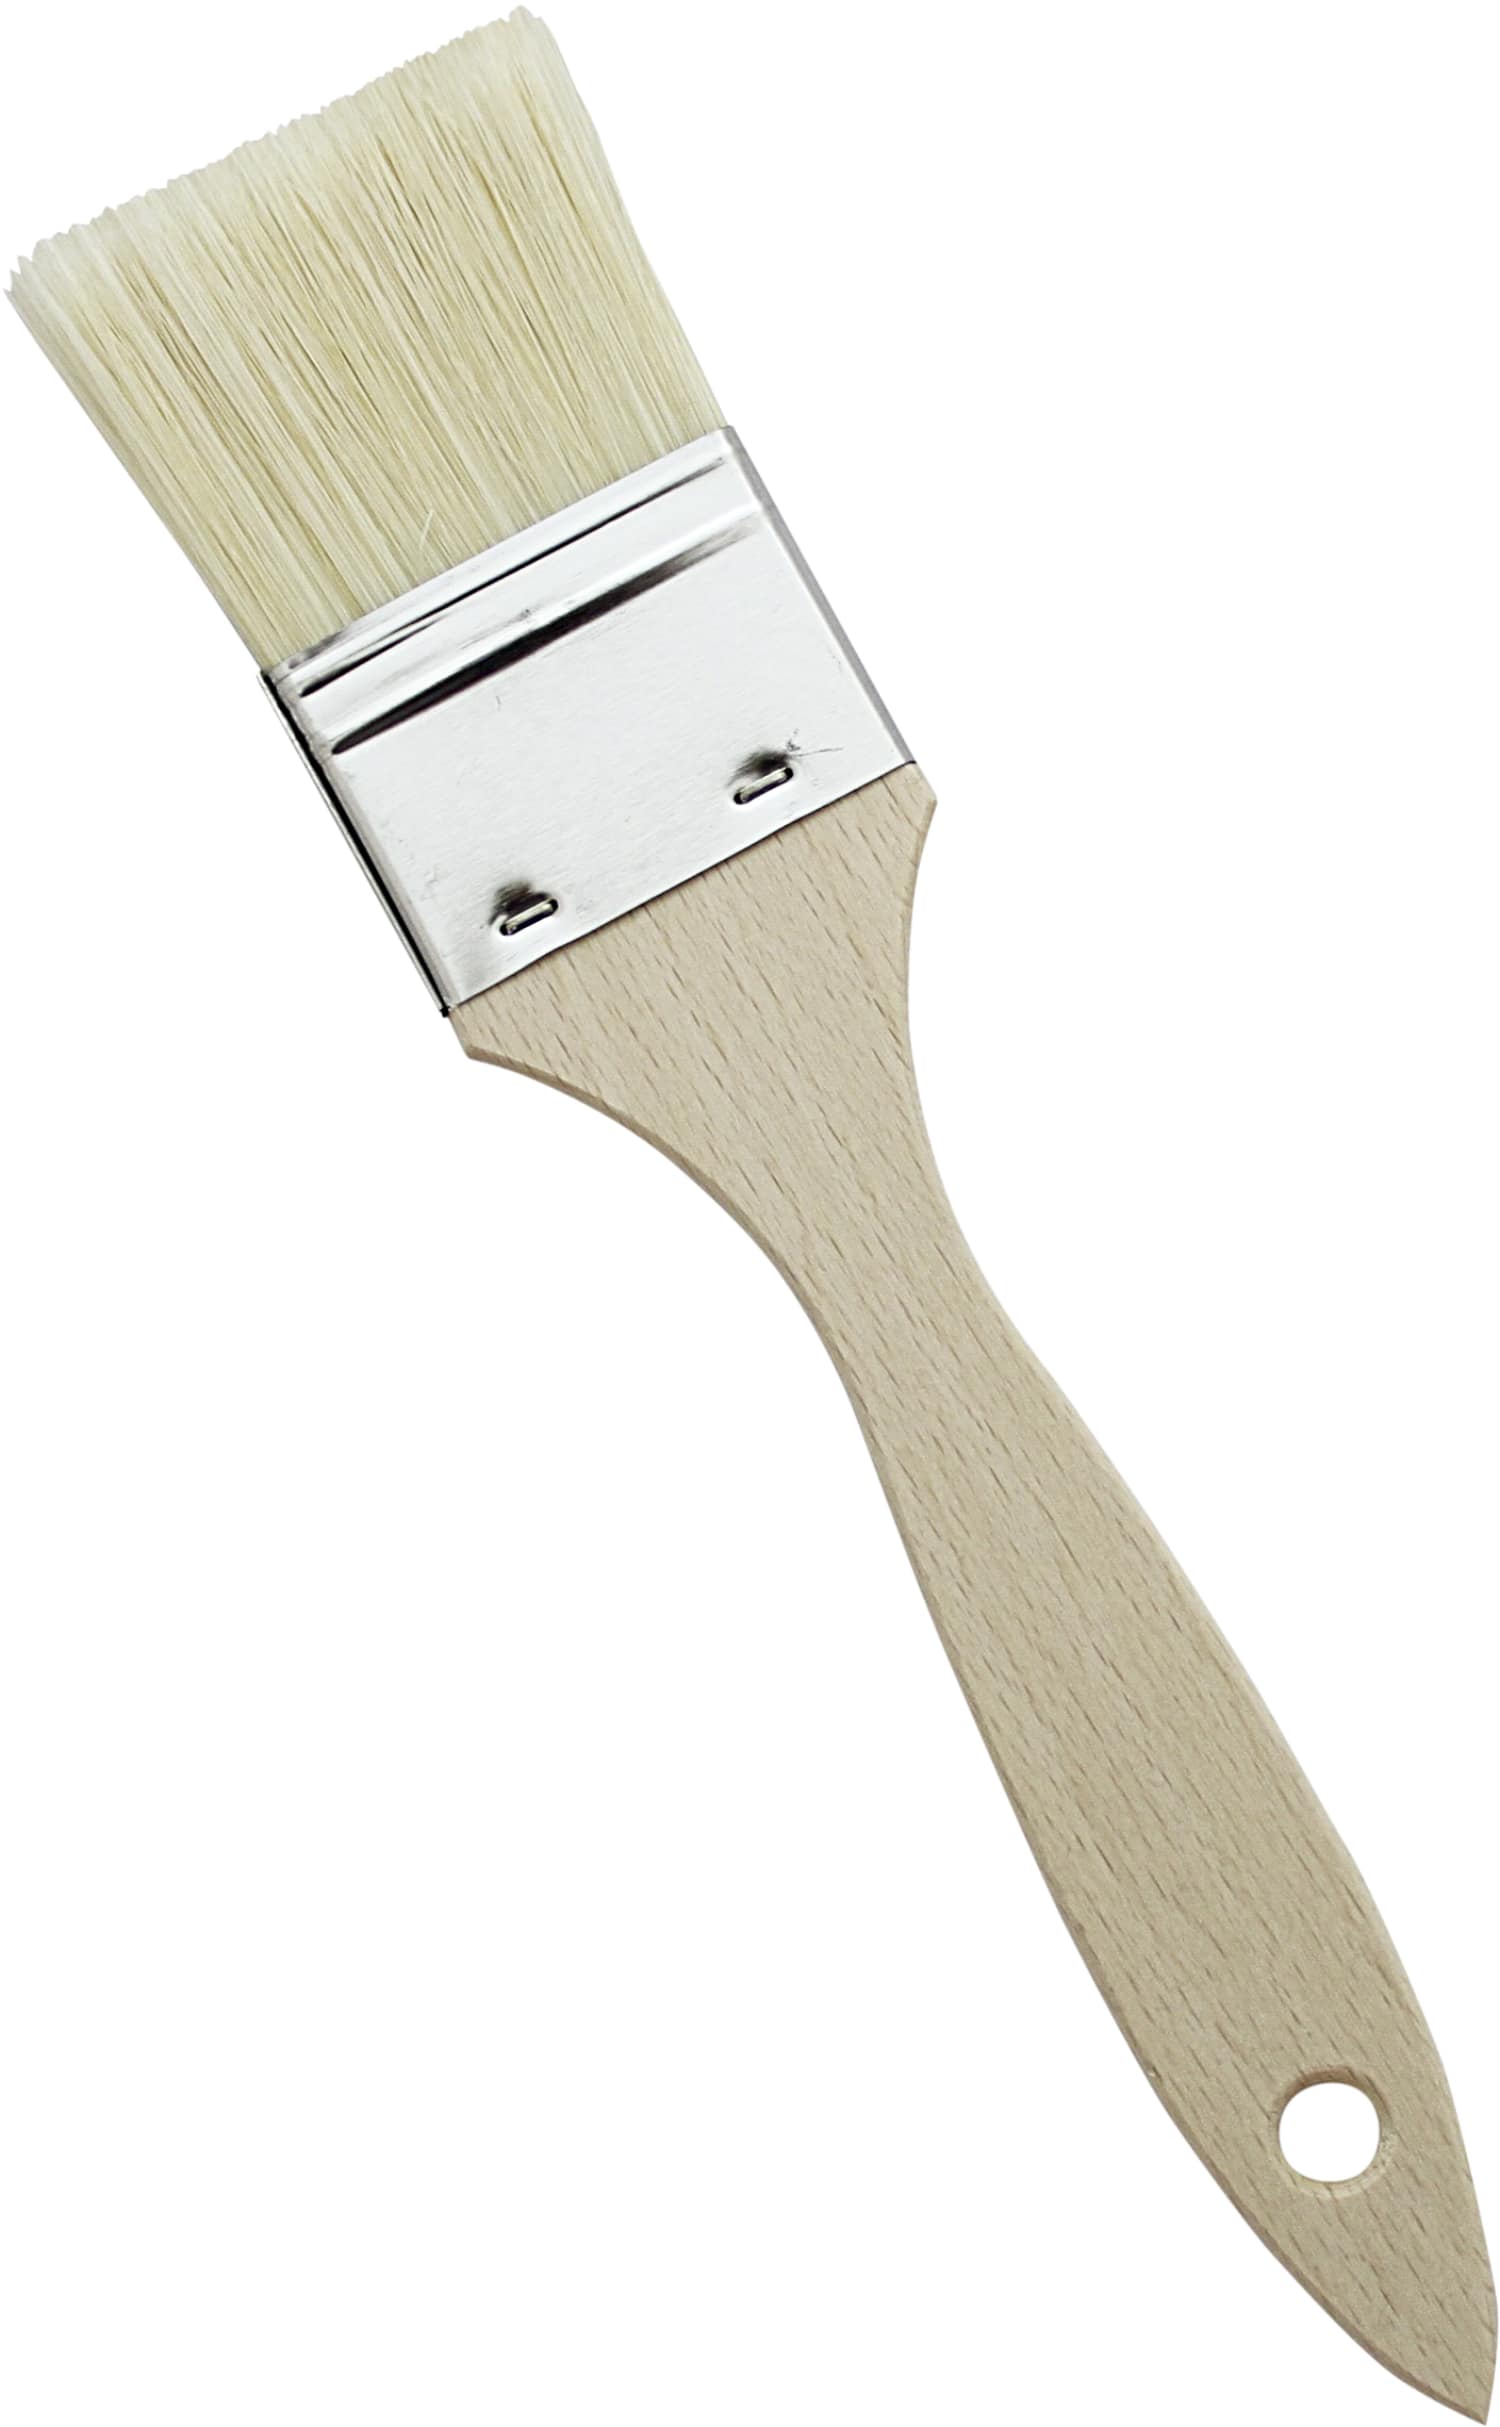 Pastry brushes wooden handle food safe